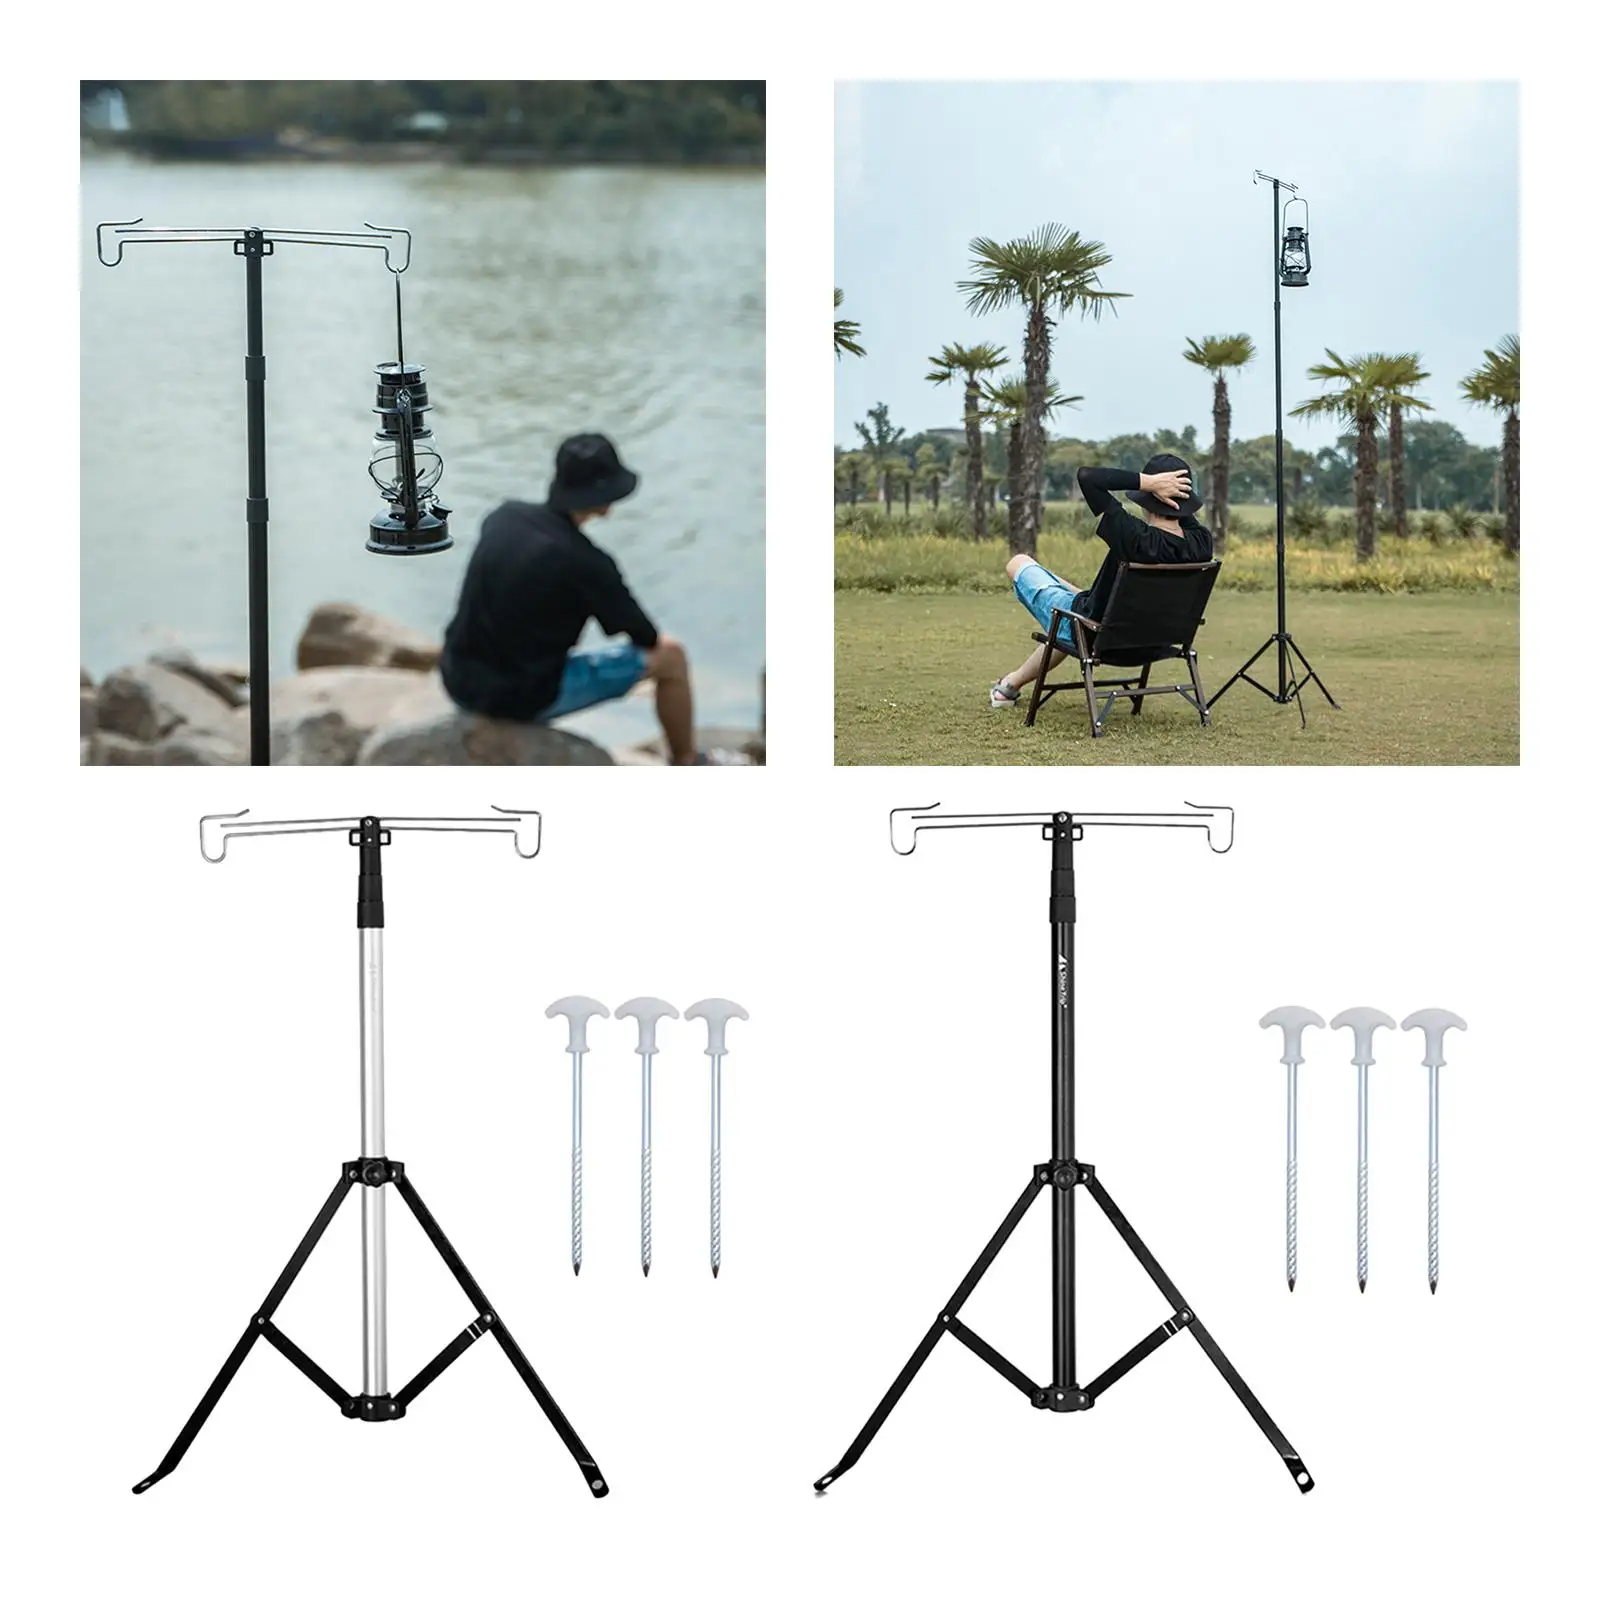 Camping Lantern Post Tripod Design Portable Folding Collapsible for Barbecue